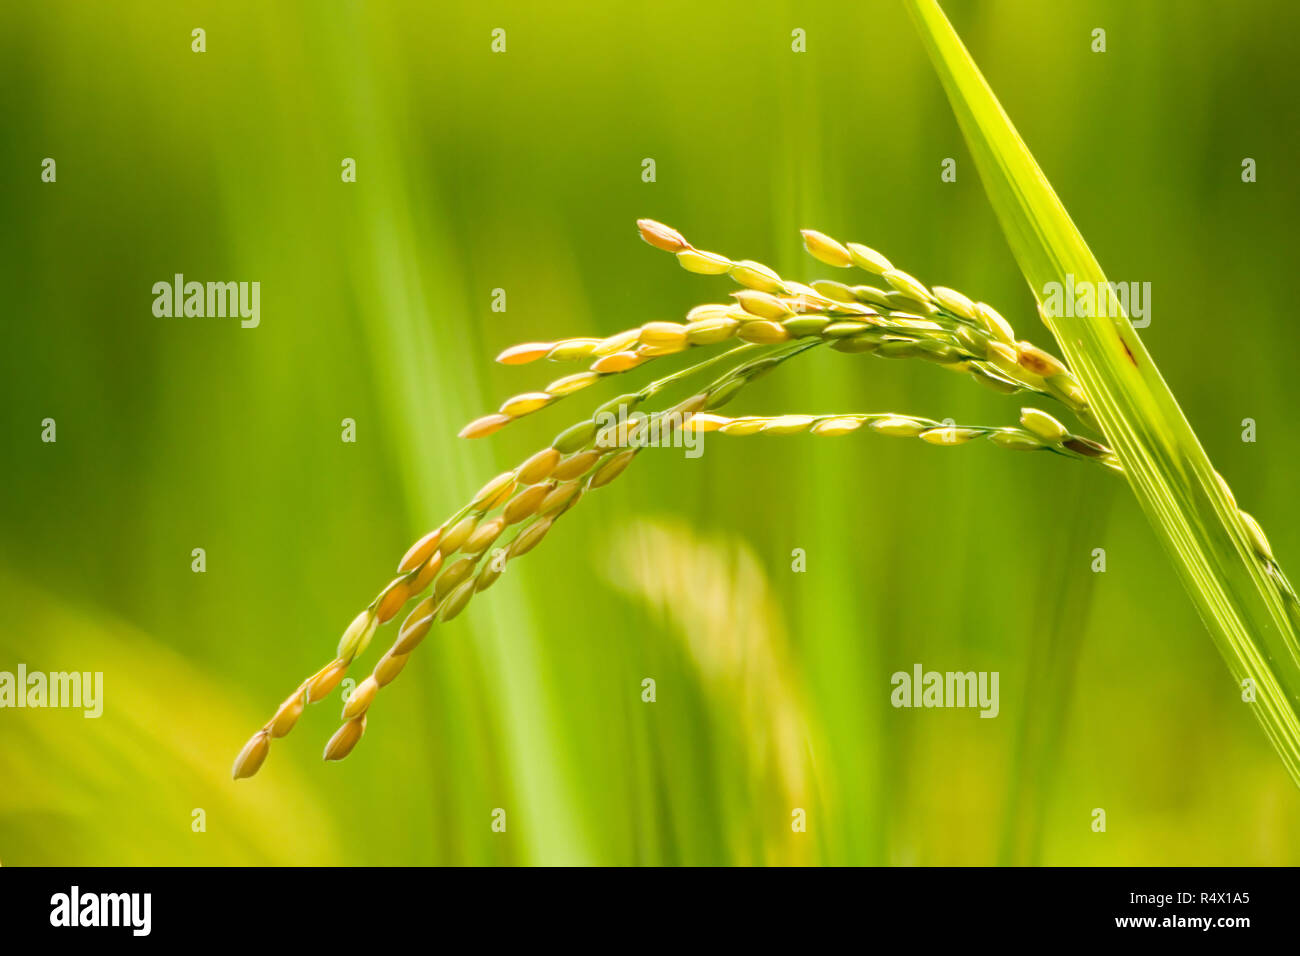 Rice farm - Rice field - Rice paddy, green rice plants Rice paddy  with beautiful background Stock Photo